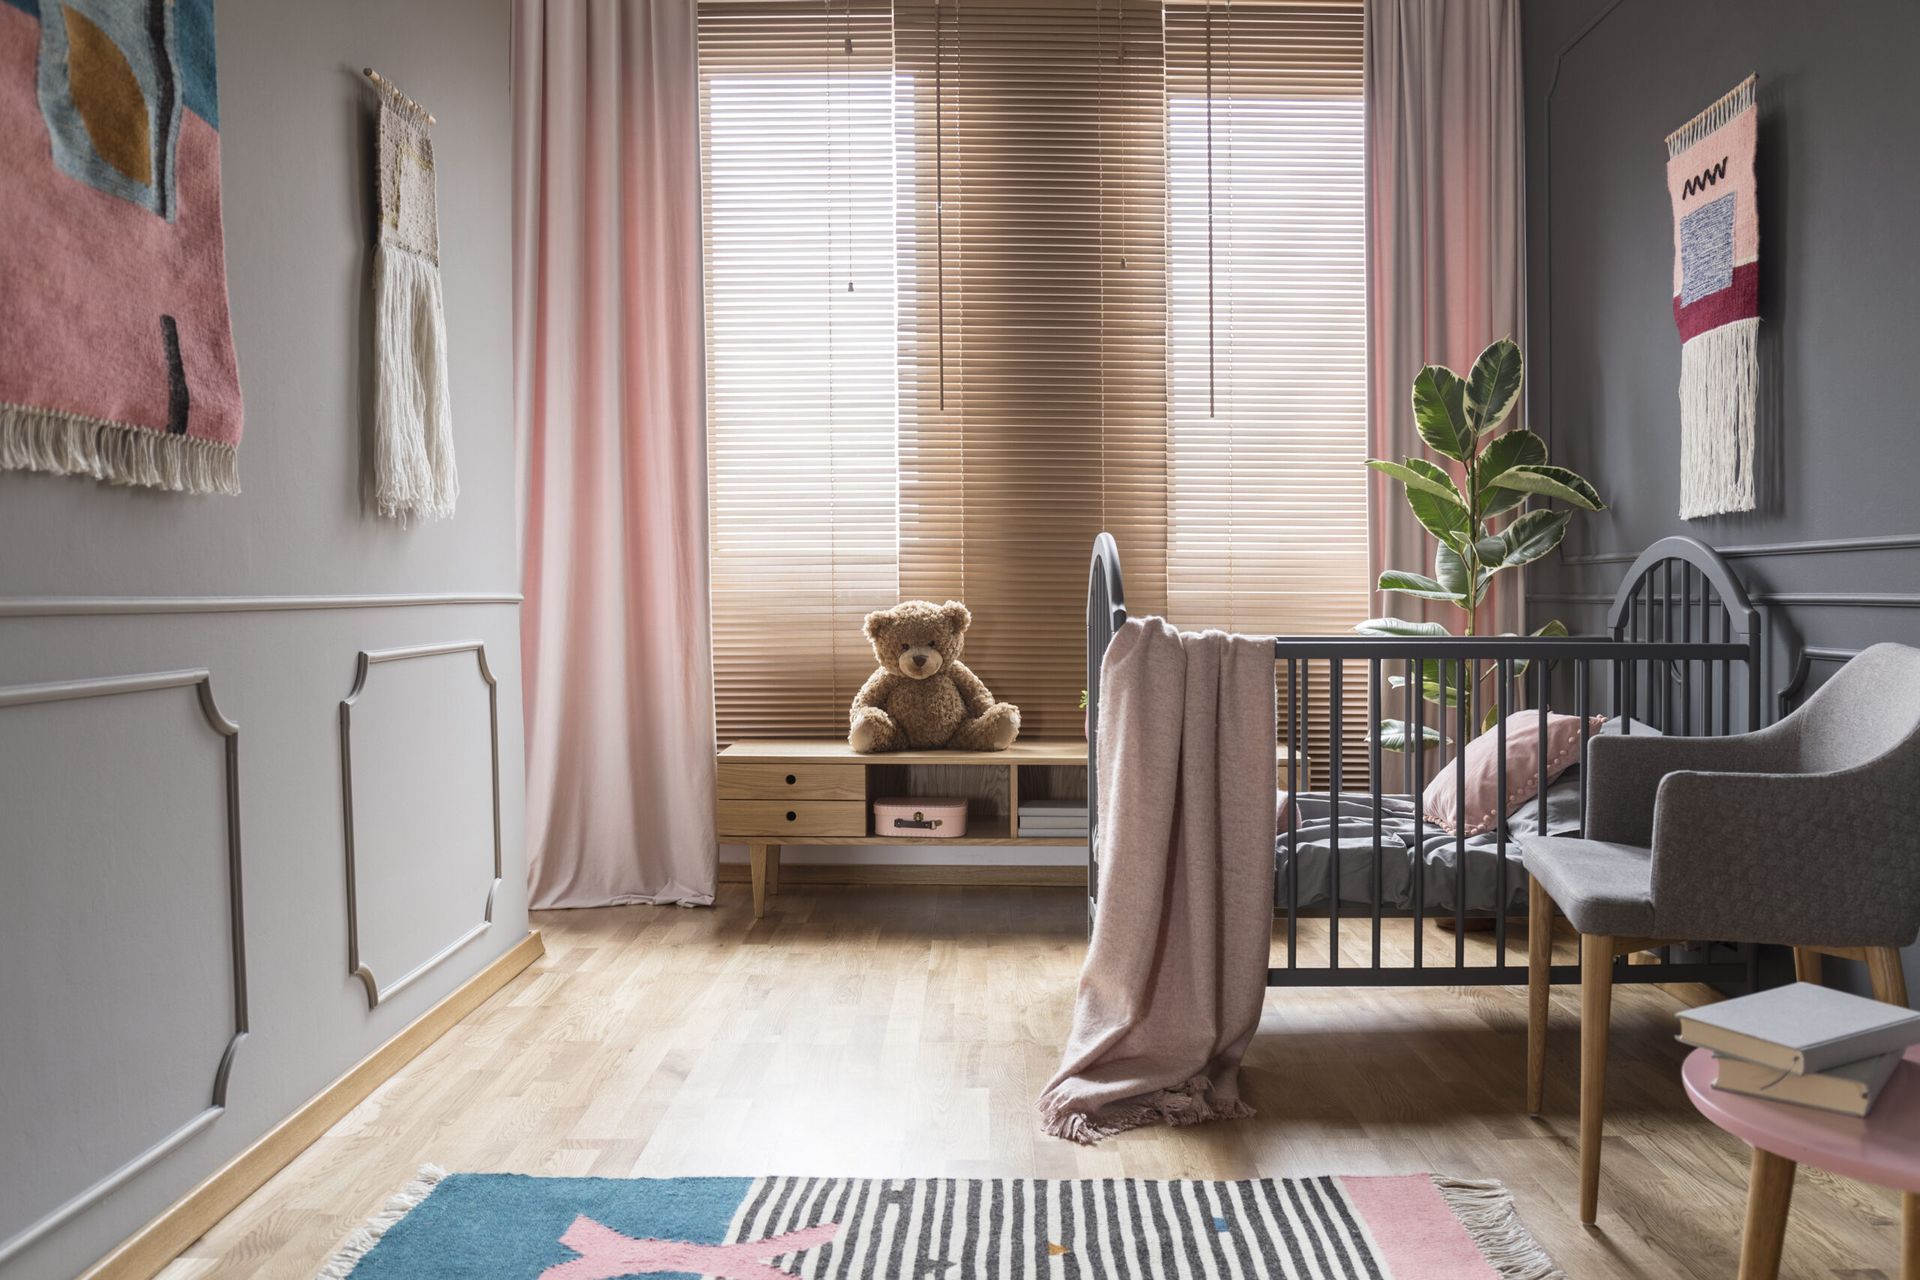 Drapes and blinds on windows in child's bedroom interior — Homemakers Lifestyle Maroochydore In Maro